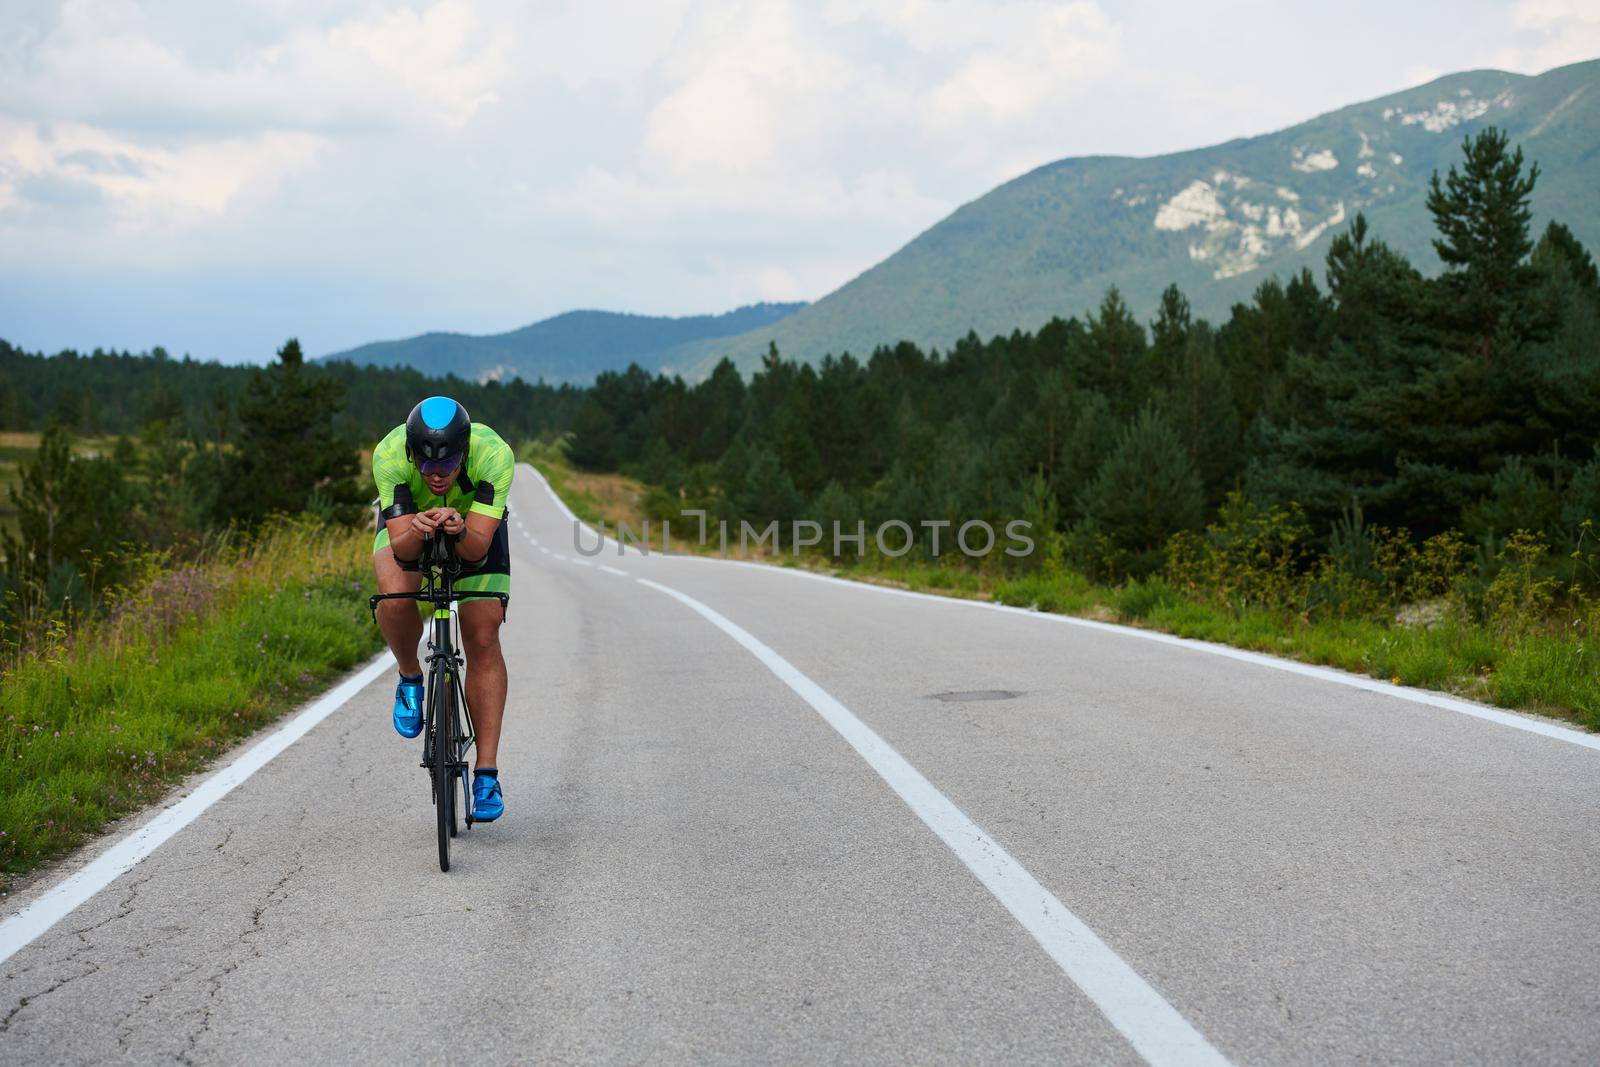 triathlon athlete riding professional racing bike at workout on curvy country road